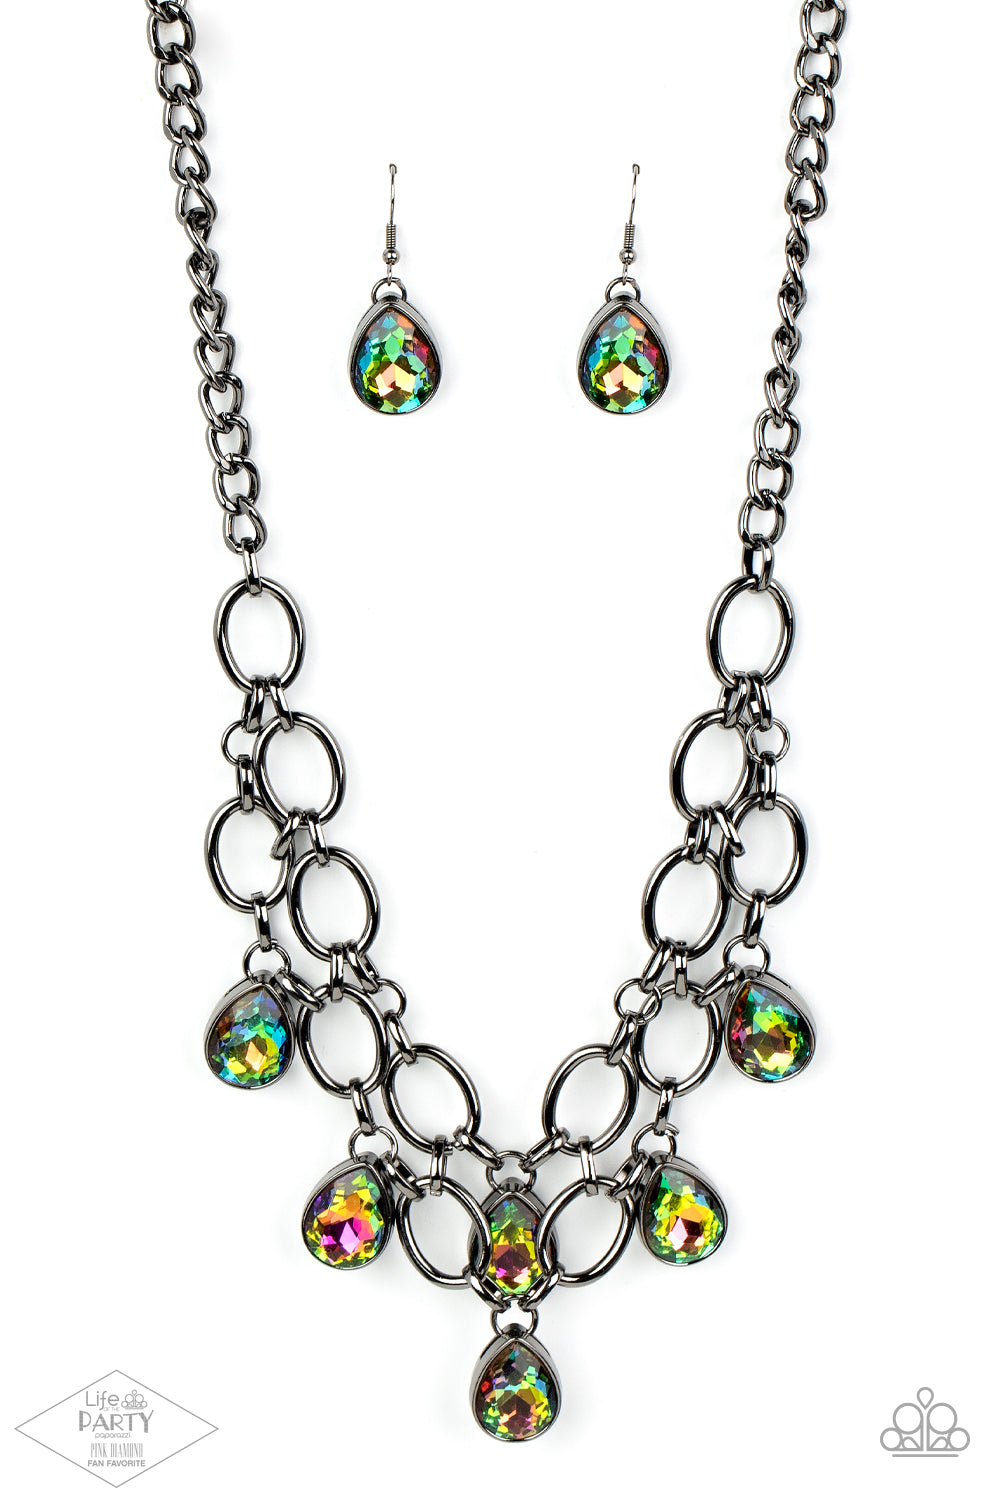 Joined by dainty gunmetal links, two rows of dramatic gunmetal chain layer below the collar in a fierce fashion. Oil spill teardrop gems drip from the glistening layers, adding a timeless shimmer to the show-stopping piece. Features an adjustable clasp closure.  Sold as one individual necklace. Includes one pair of matching earrings.   FANFAVORITE